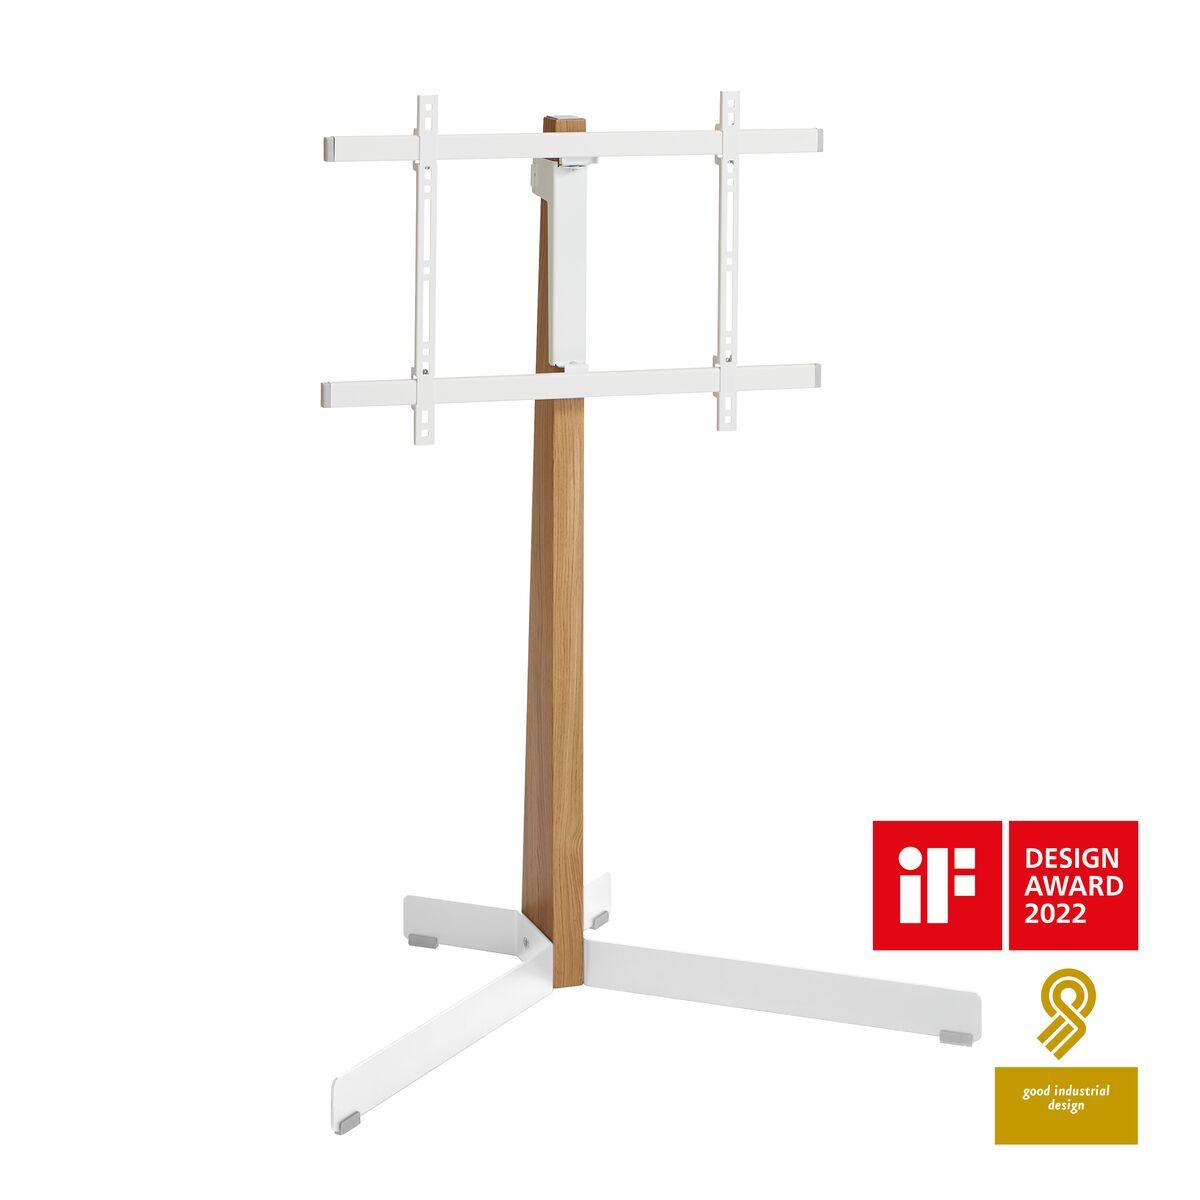 Vogel's TVS 3695 TV Floor Stand (white) - Suitable for 40 up to 77 inch TVs up to Promo